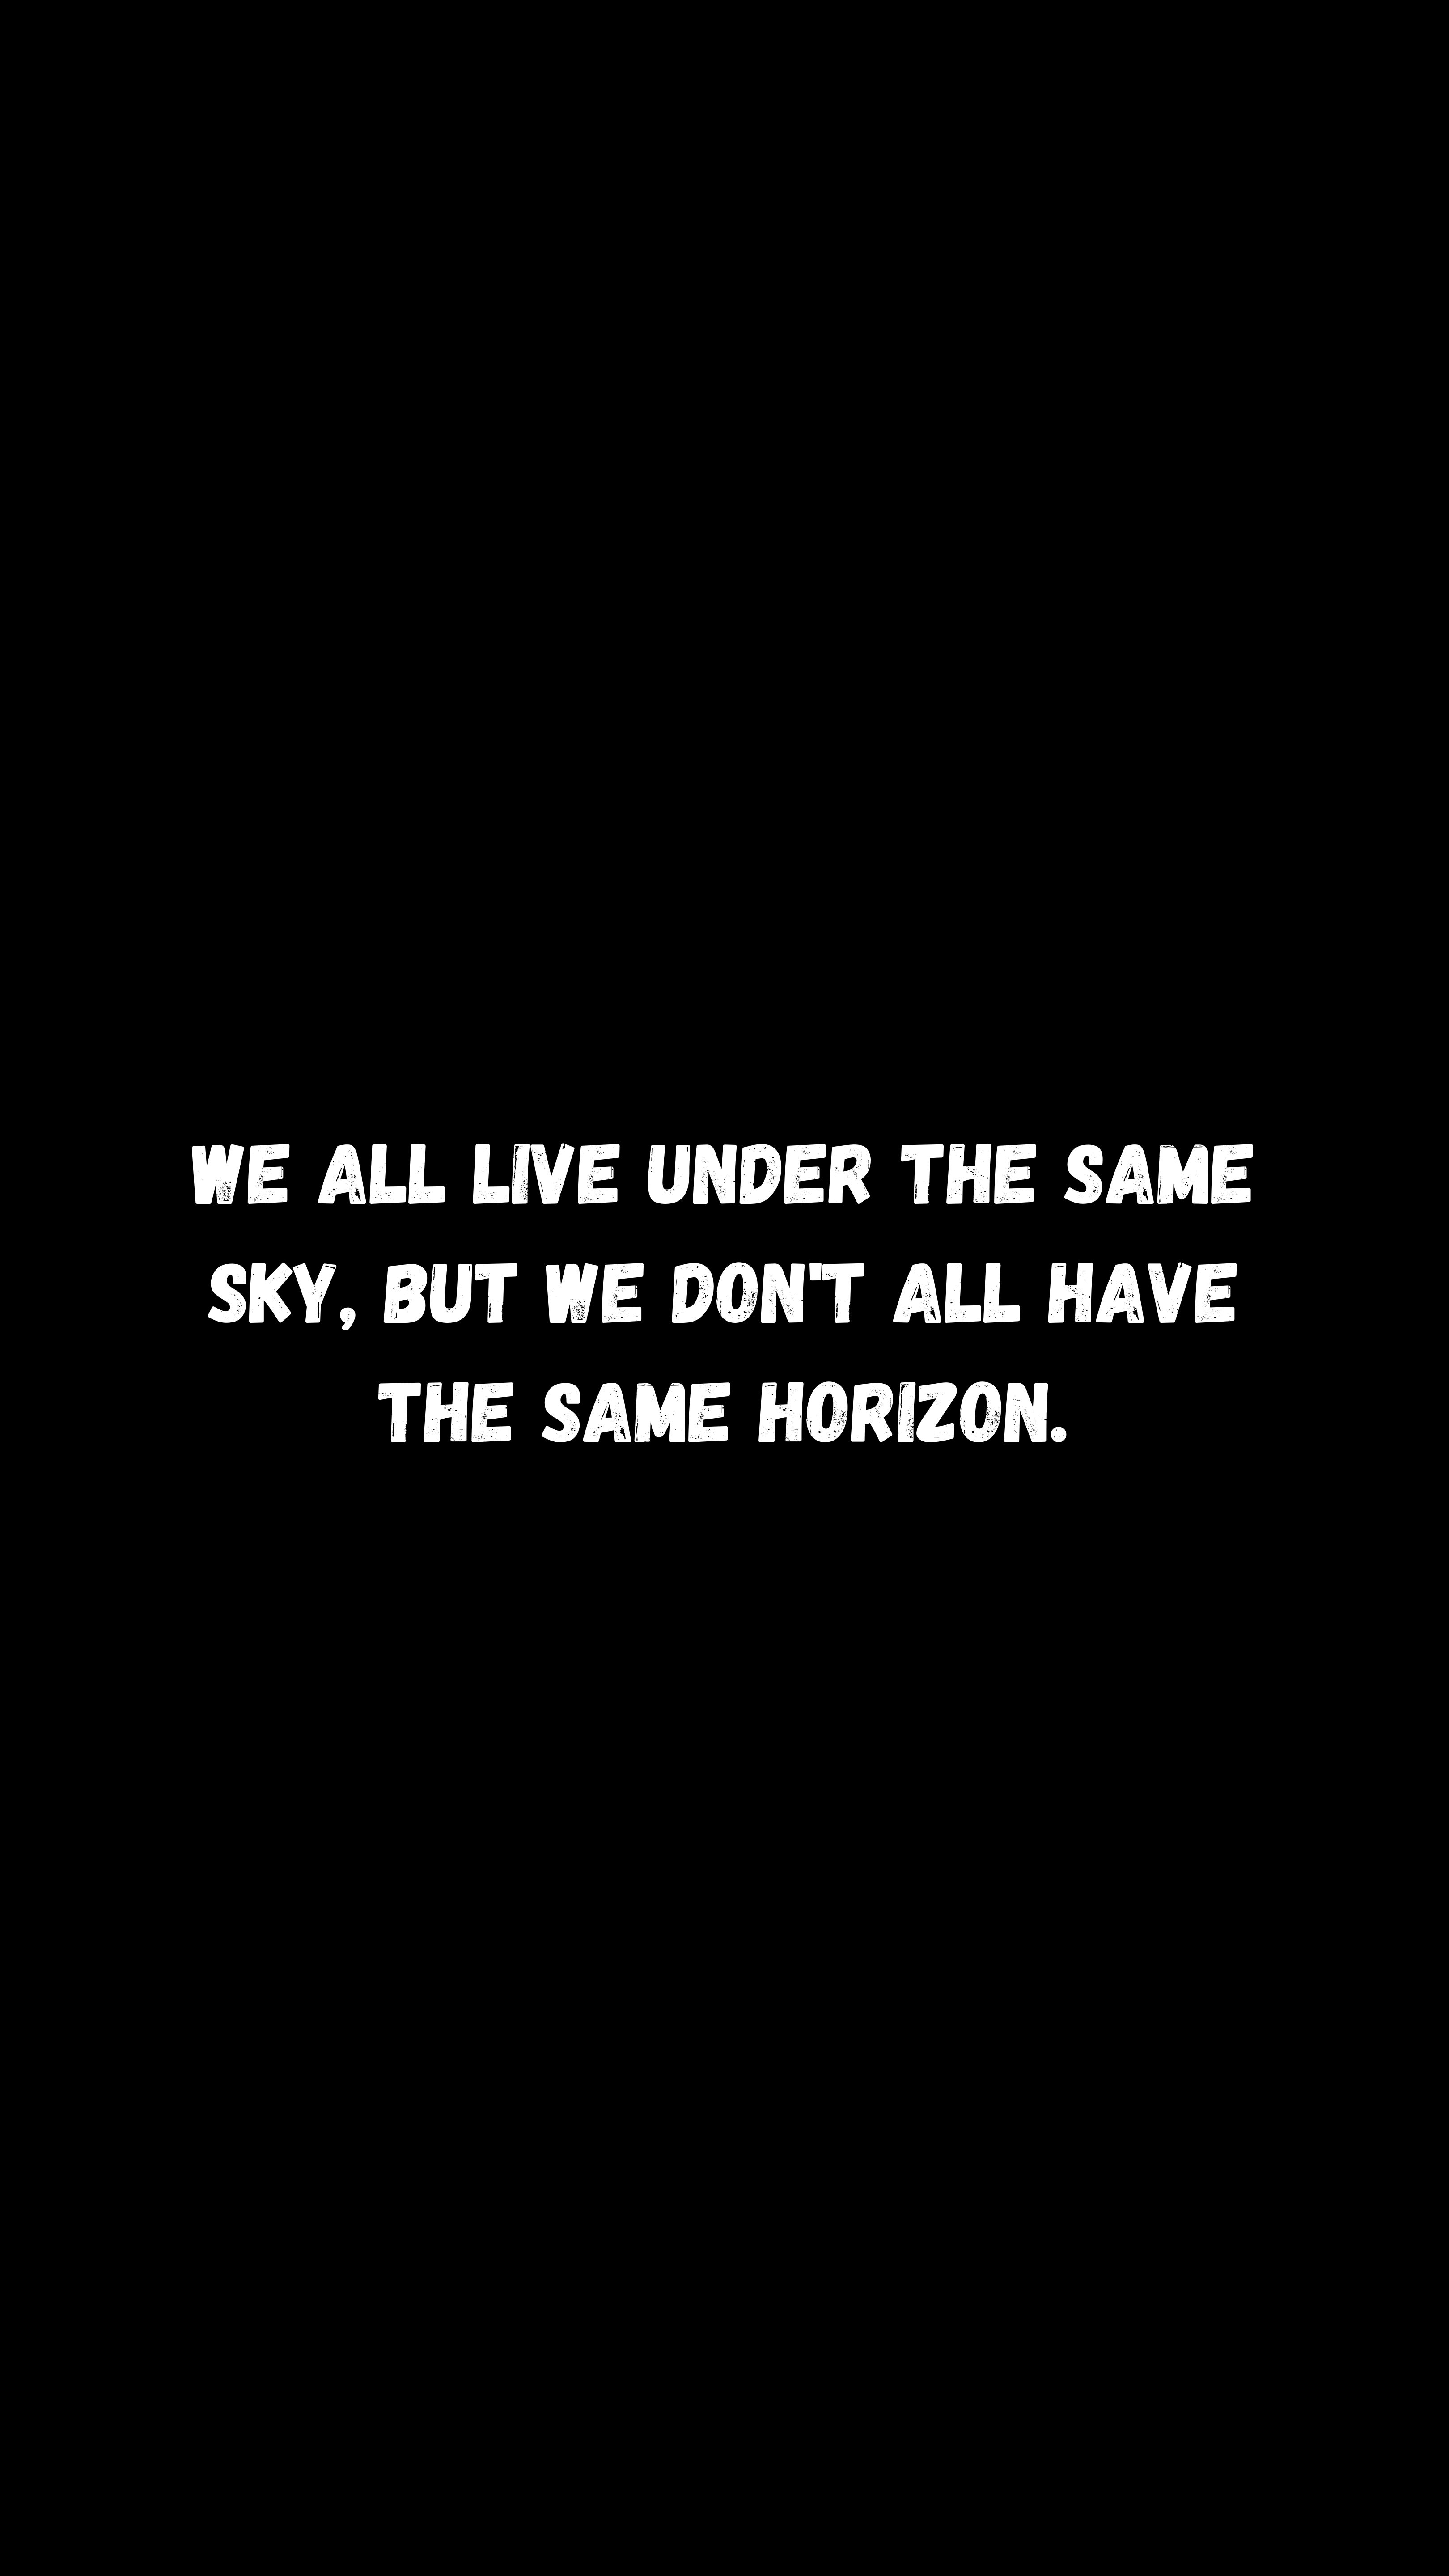 quote, meaning, sky, horizon, words, quotation cellphone